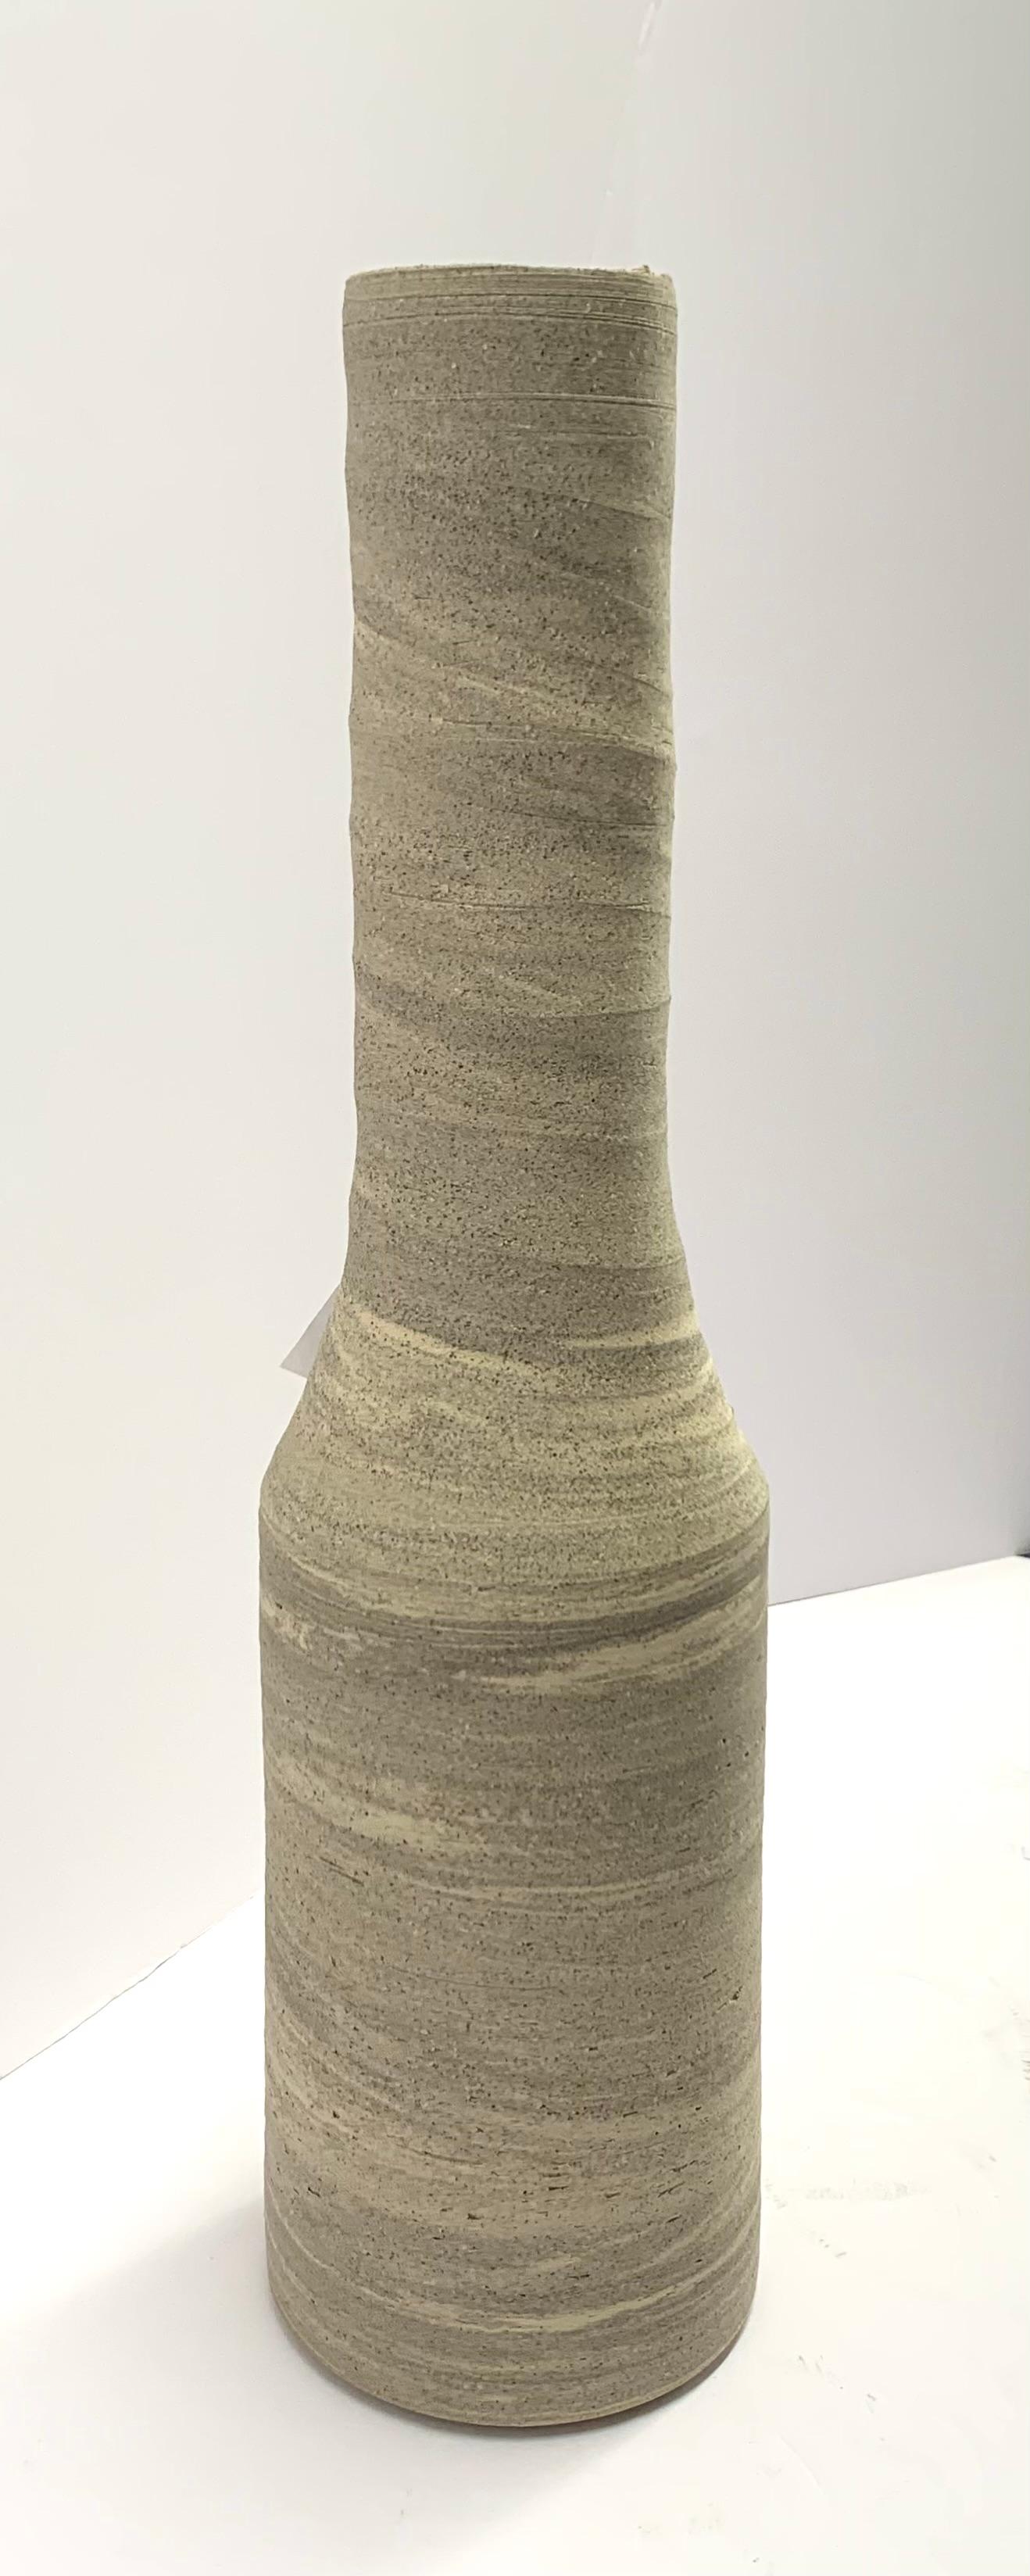 Contemporary German handmade stoneware vase.
Tall, thin funnel neck opening.
White, black and sand color stoneware.
Part of a large collection of handmade vases of different sizes , shapes and textures.